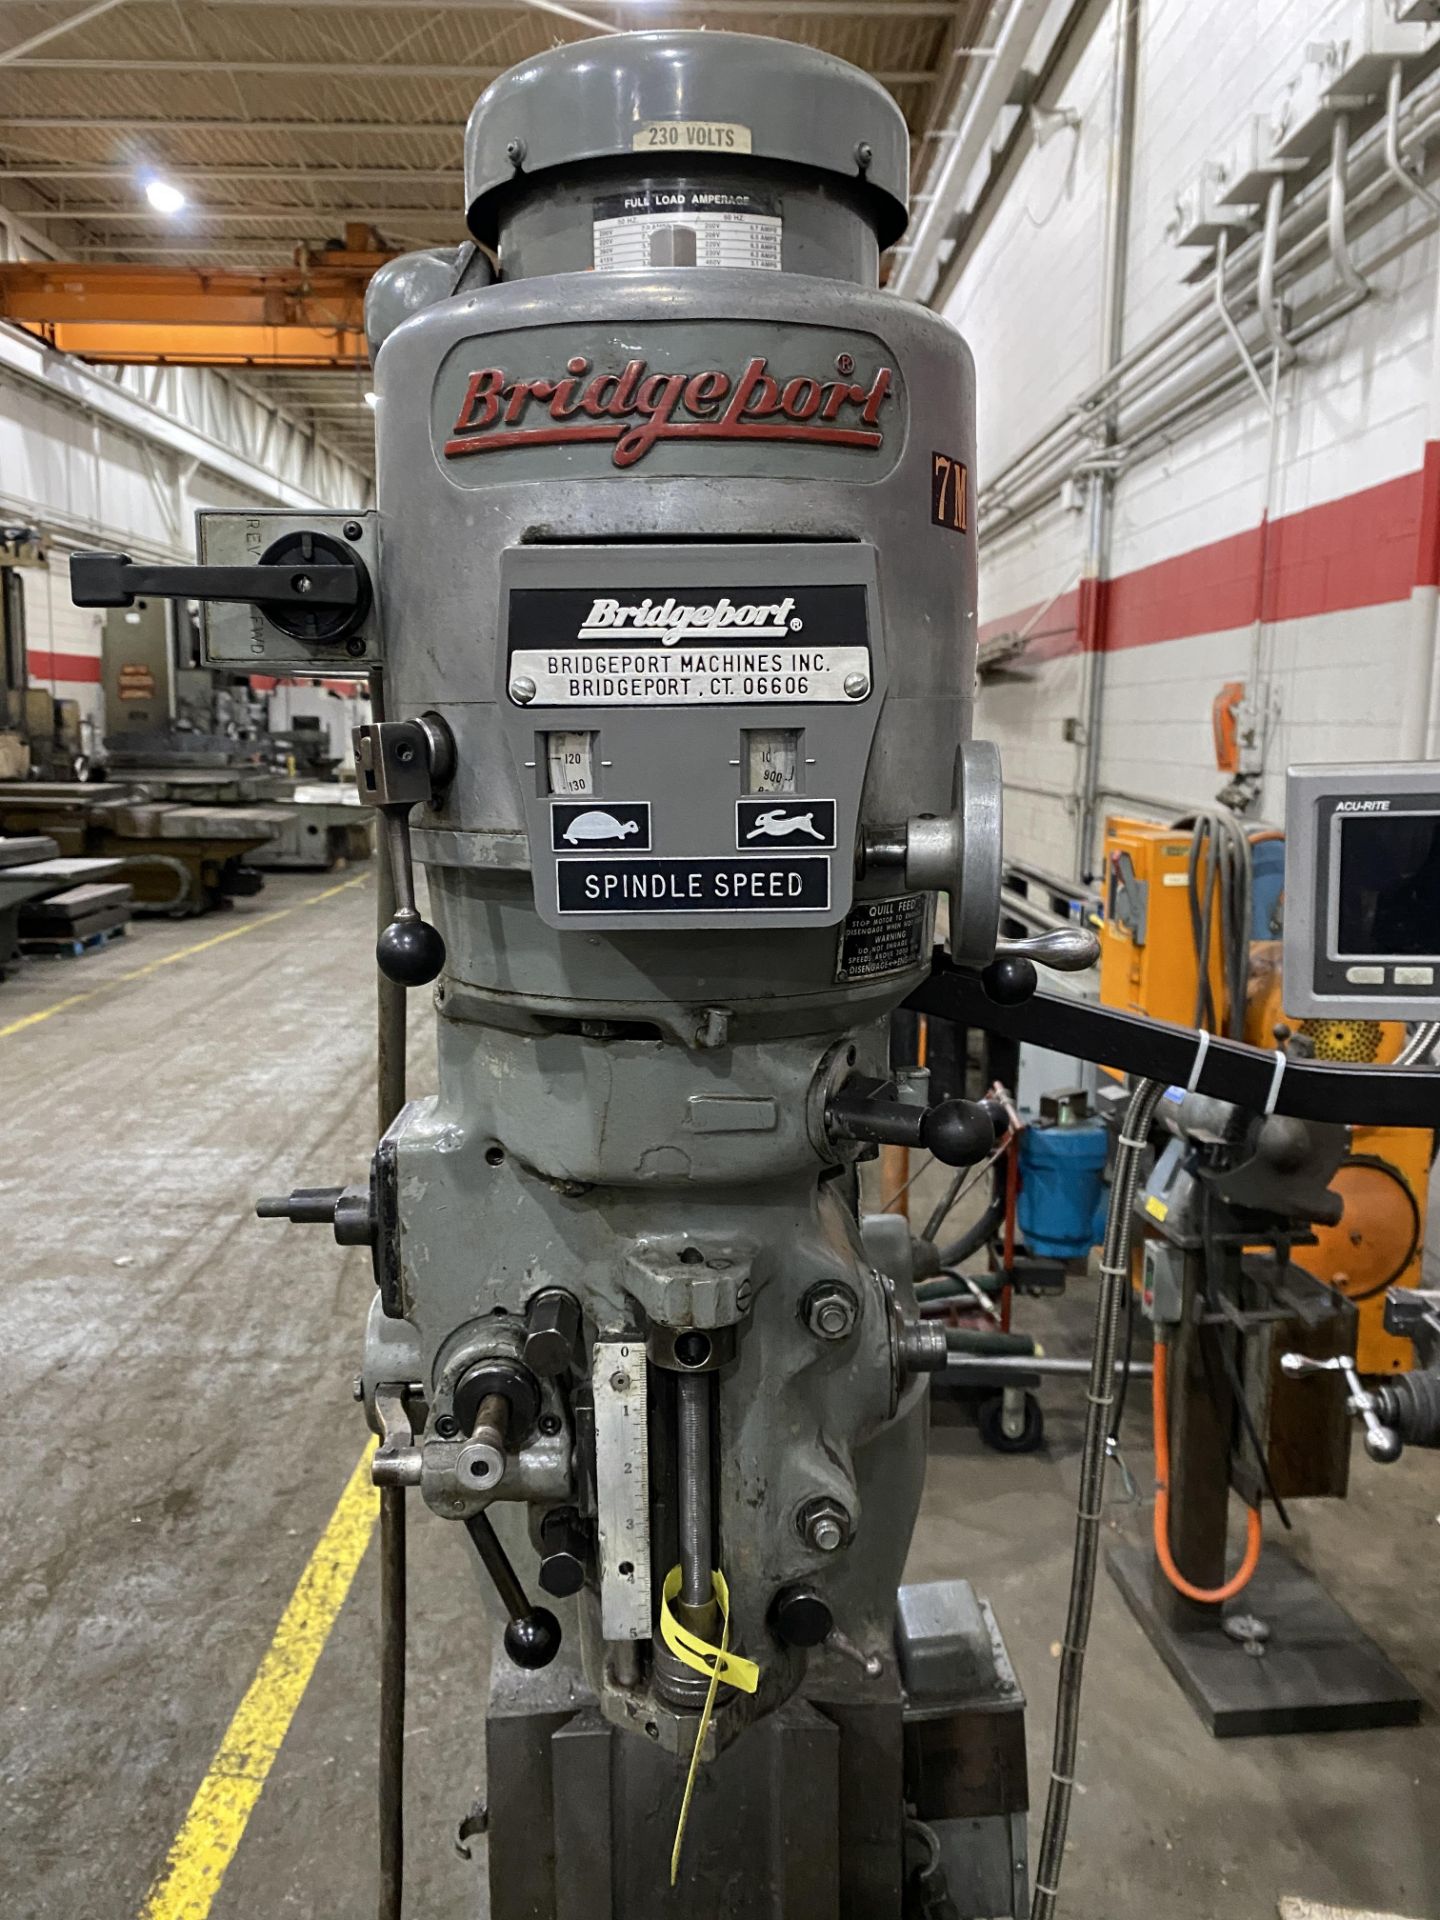 Bridgeport Series I Vertical Mill, 9" x 48", Variable Speed w/DRO - Image 4 of 10